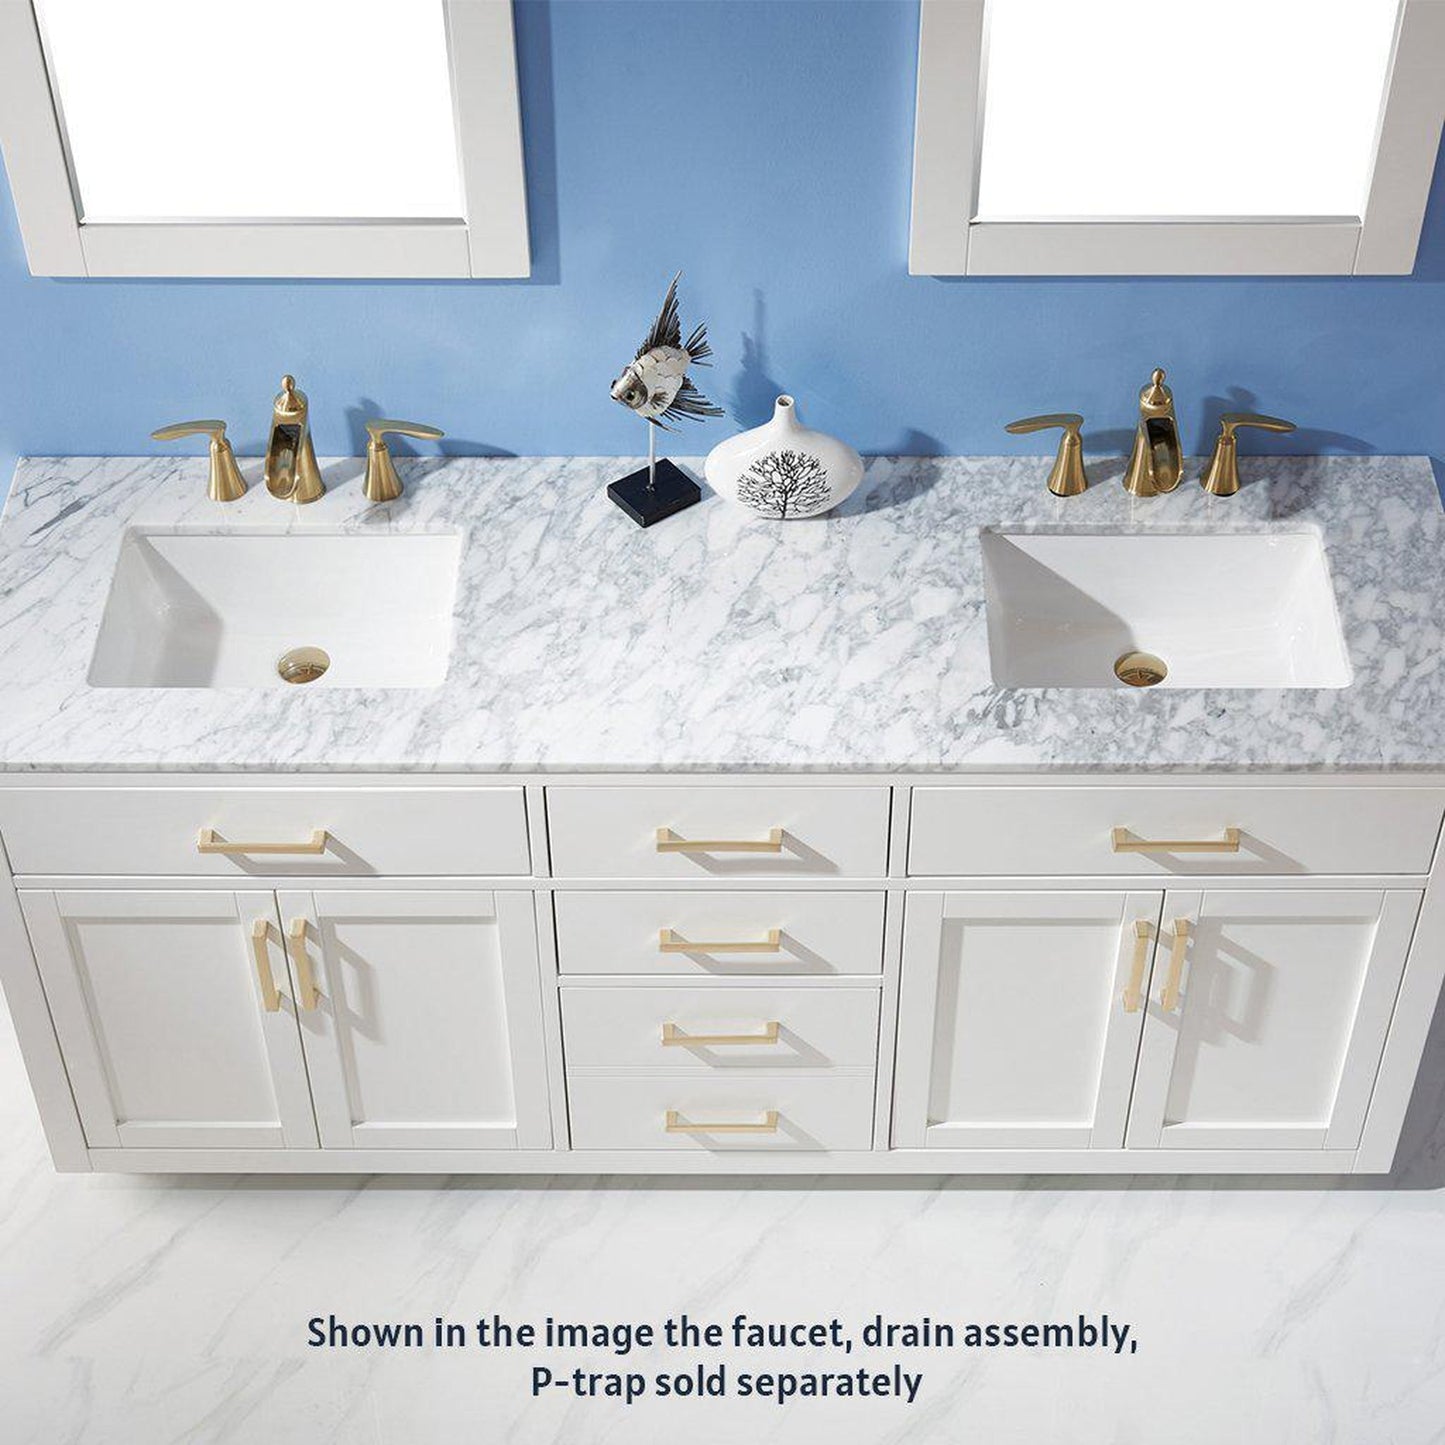 Altair Ivy 72" Double White Freestanding Bathroom Vanity Set With Mirror, Natural Carrara White Marble Top, Two Rectangular Undermount Ceramic Sinks, and Overflow